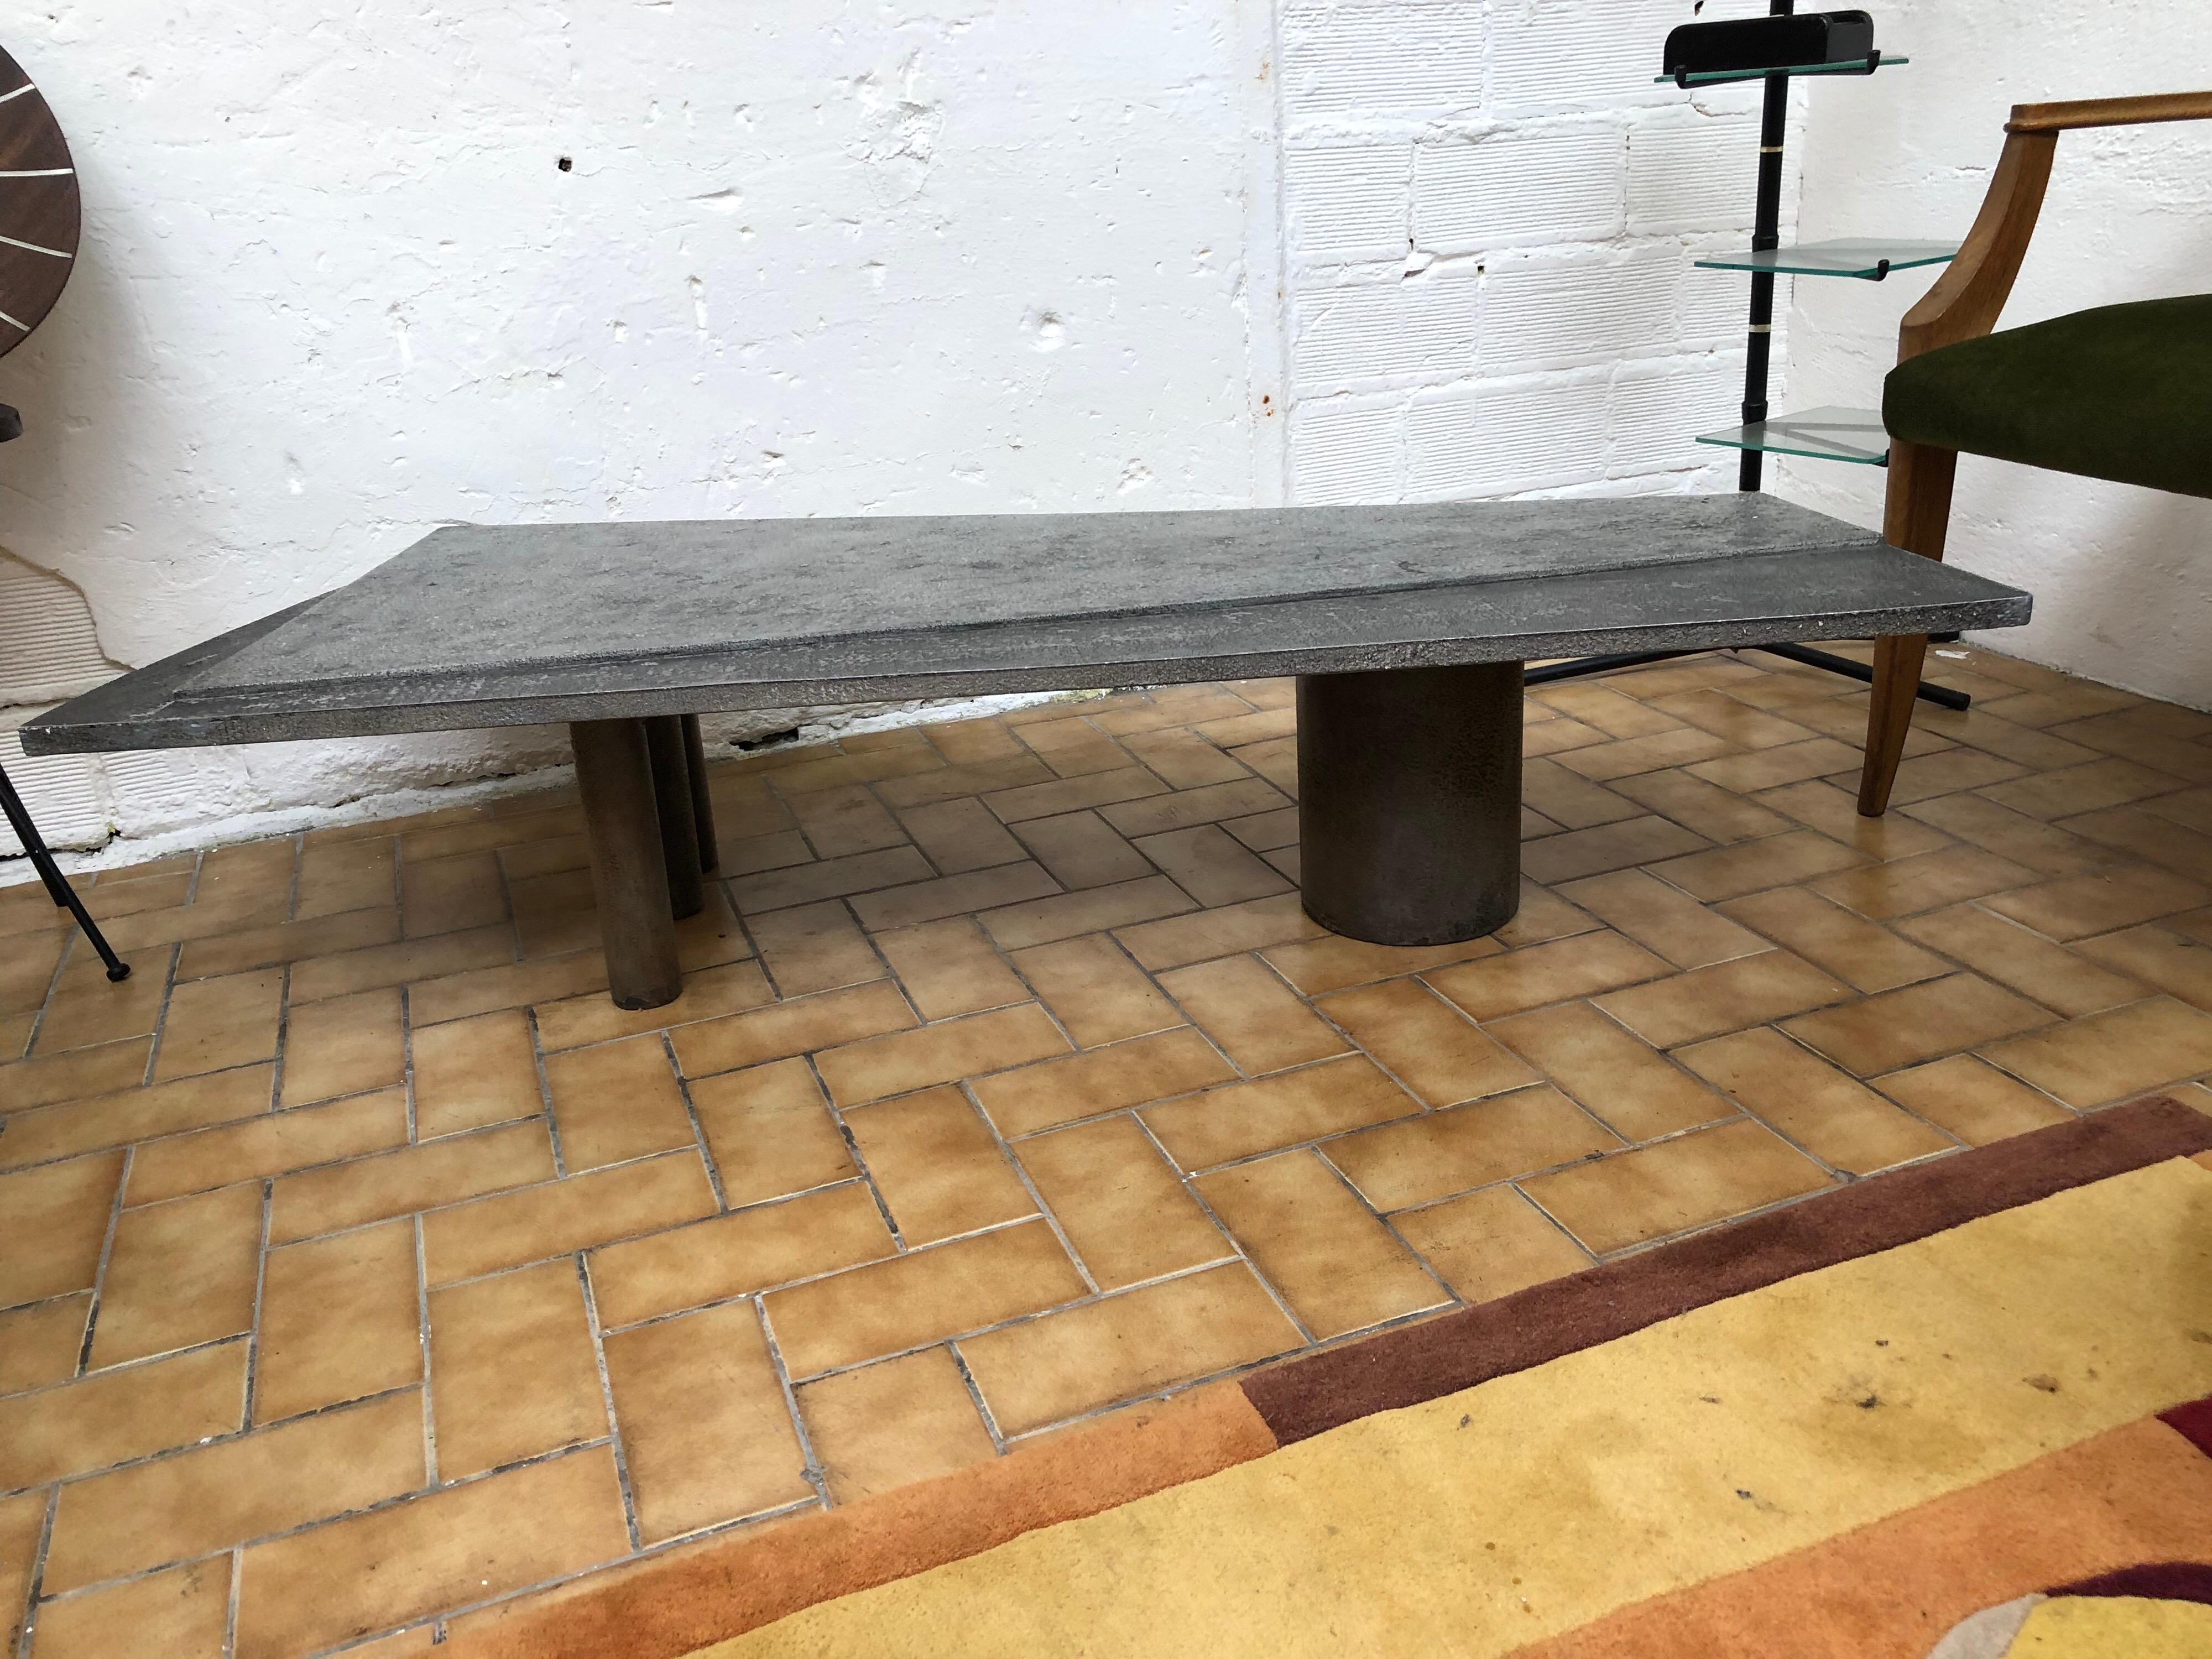 Beautiful Brutalist coffee table designed and made by the legendary Belgian company Pia Manu
The specific table is made out of a mixed ceramic and aluminium top with a metal base
the shape is a futuristic look to it and was ahead of its time as